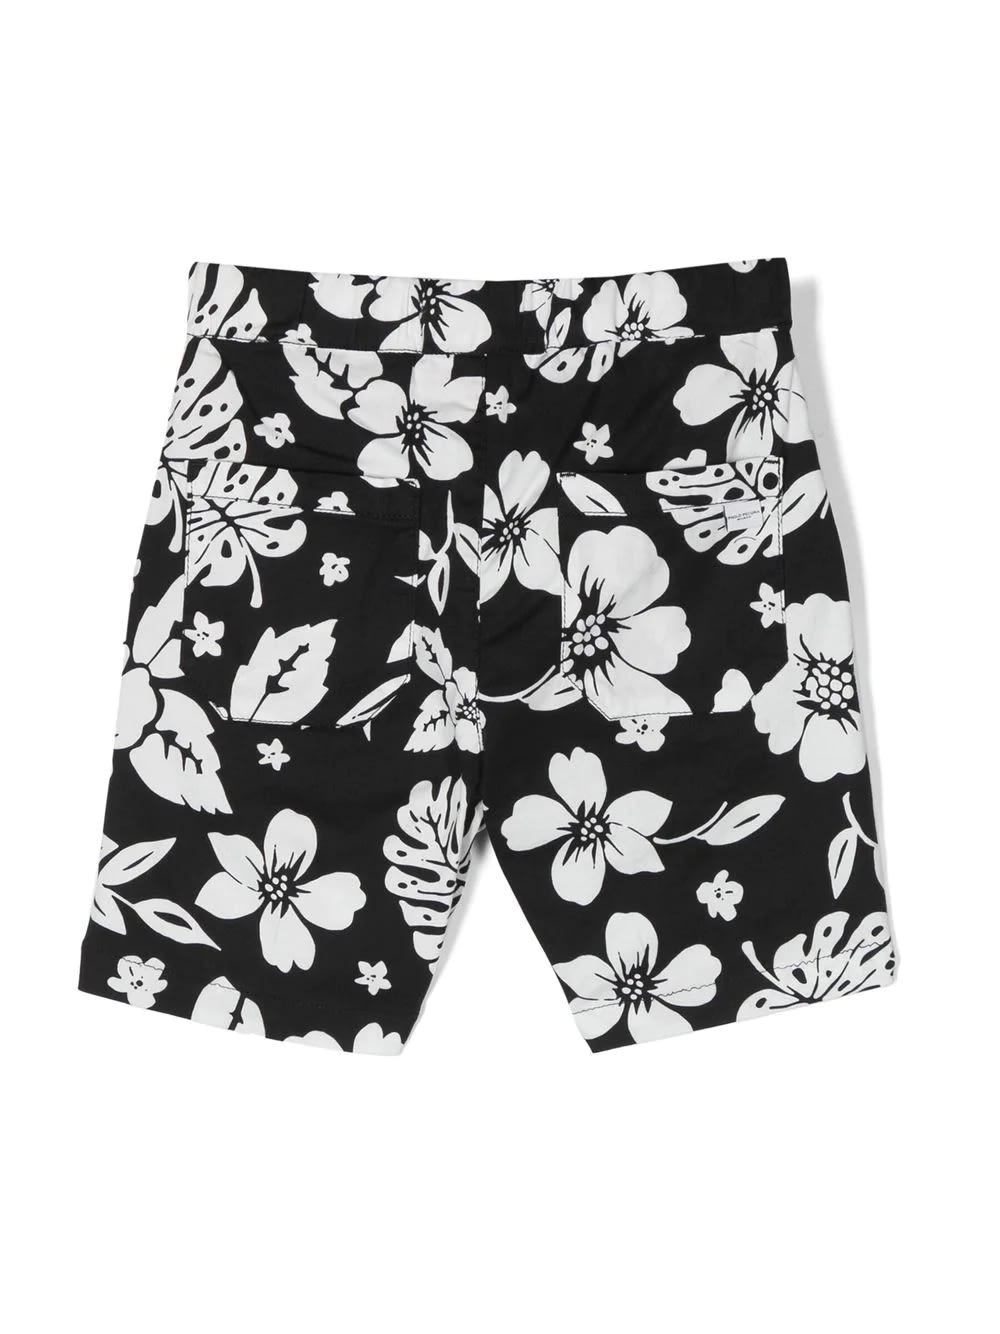 PAOLO PECORA FLORAL SHORTS